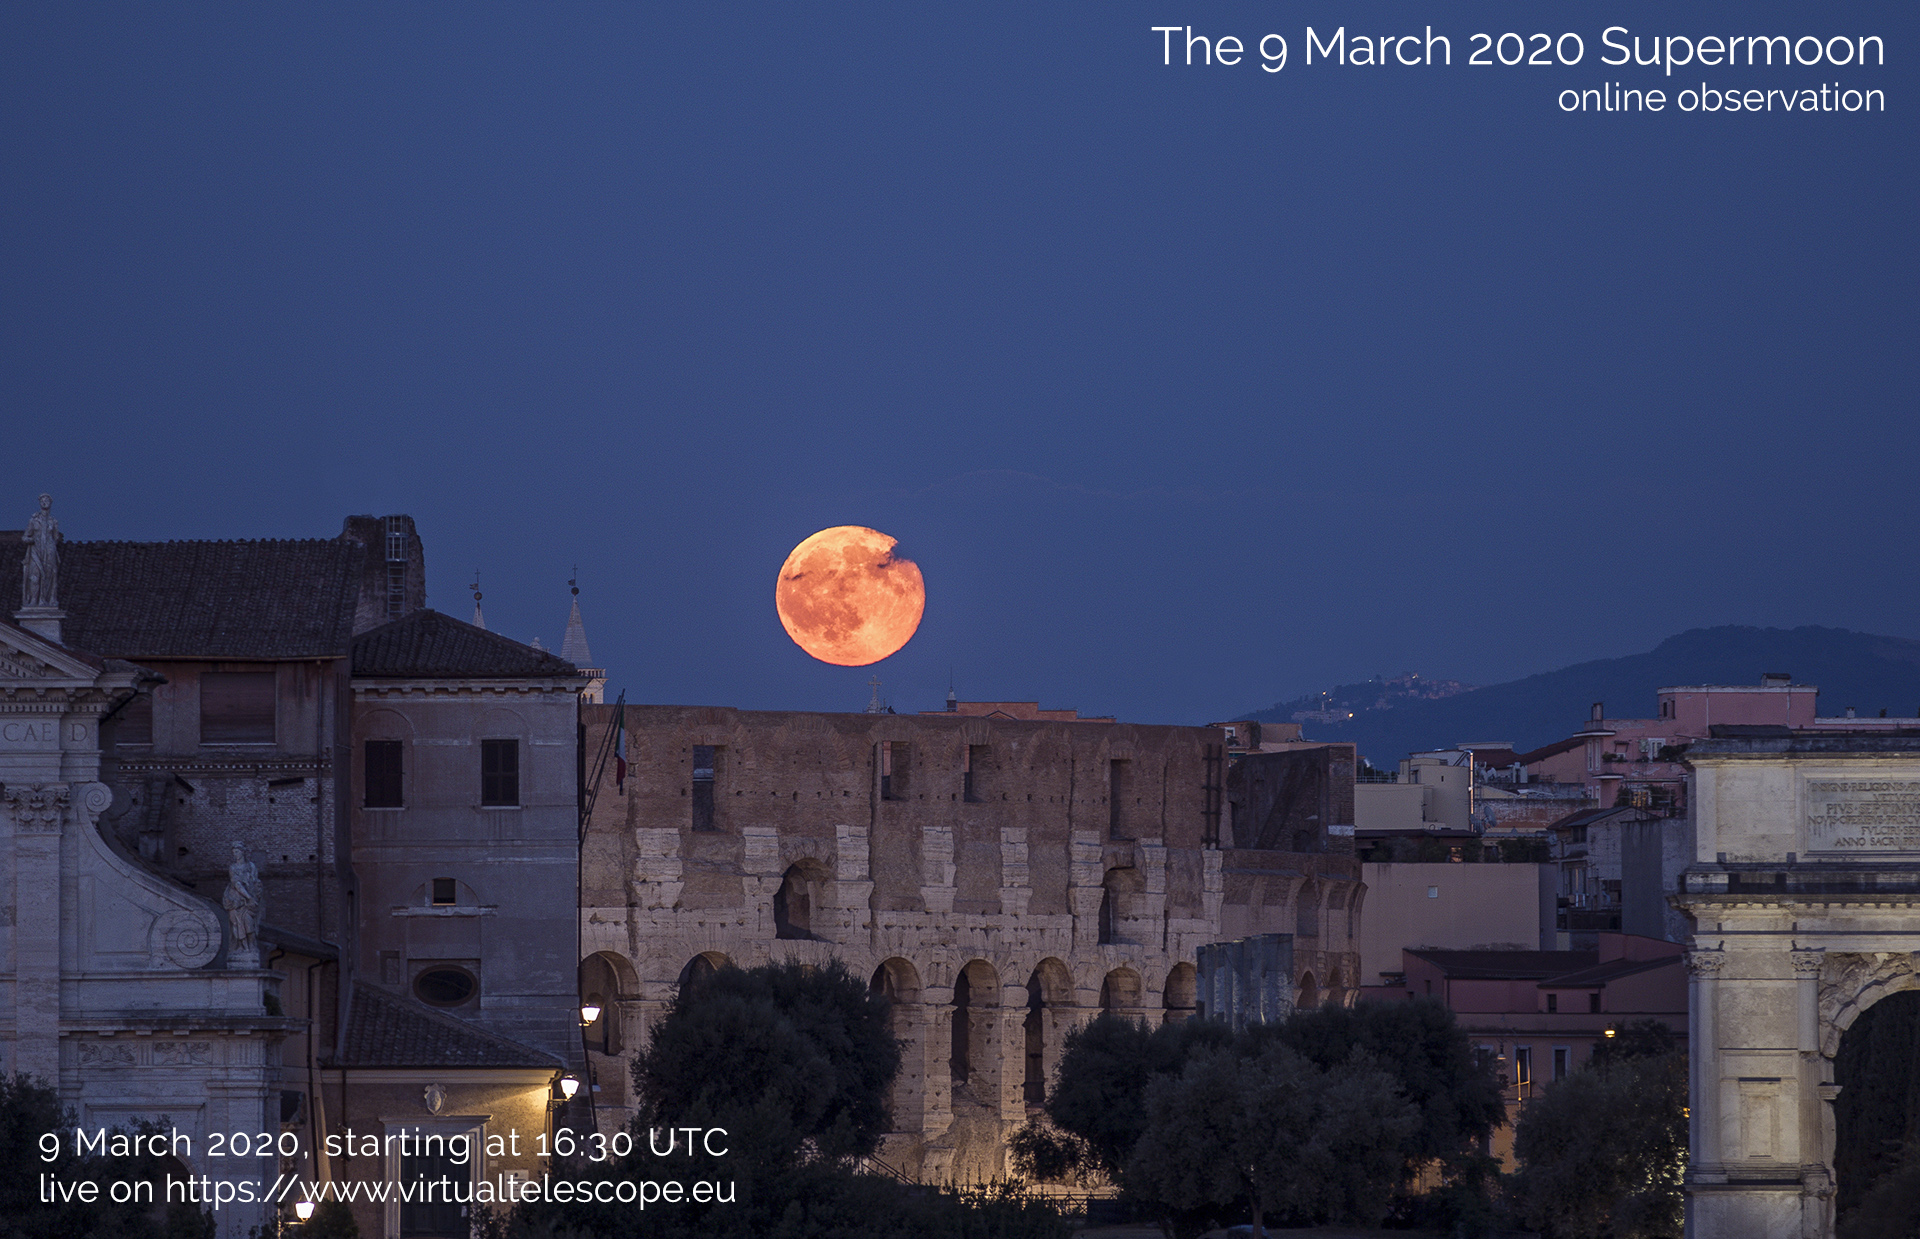 The 9 March 2020 Supermoon: poster of the event